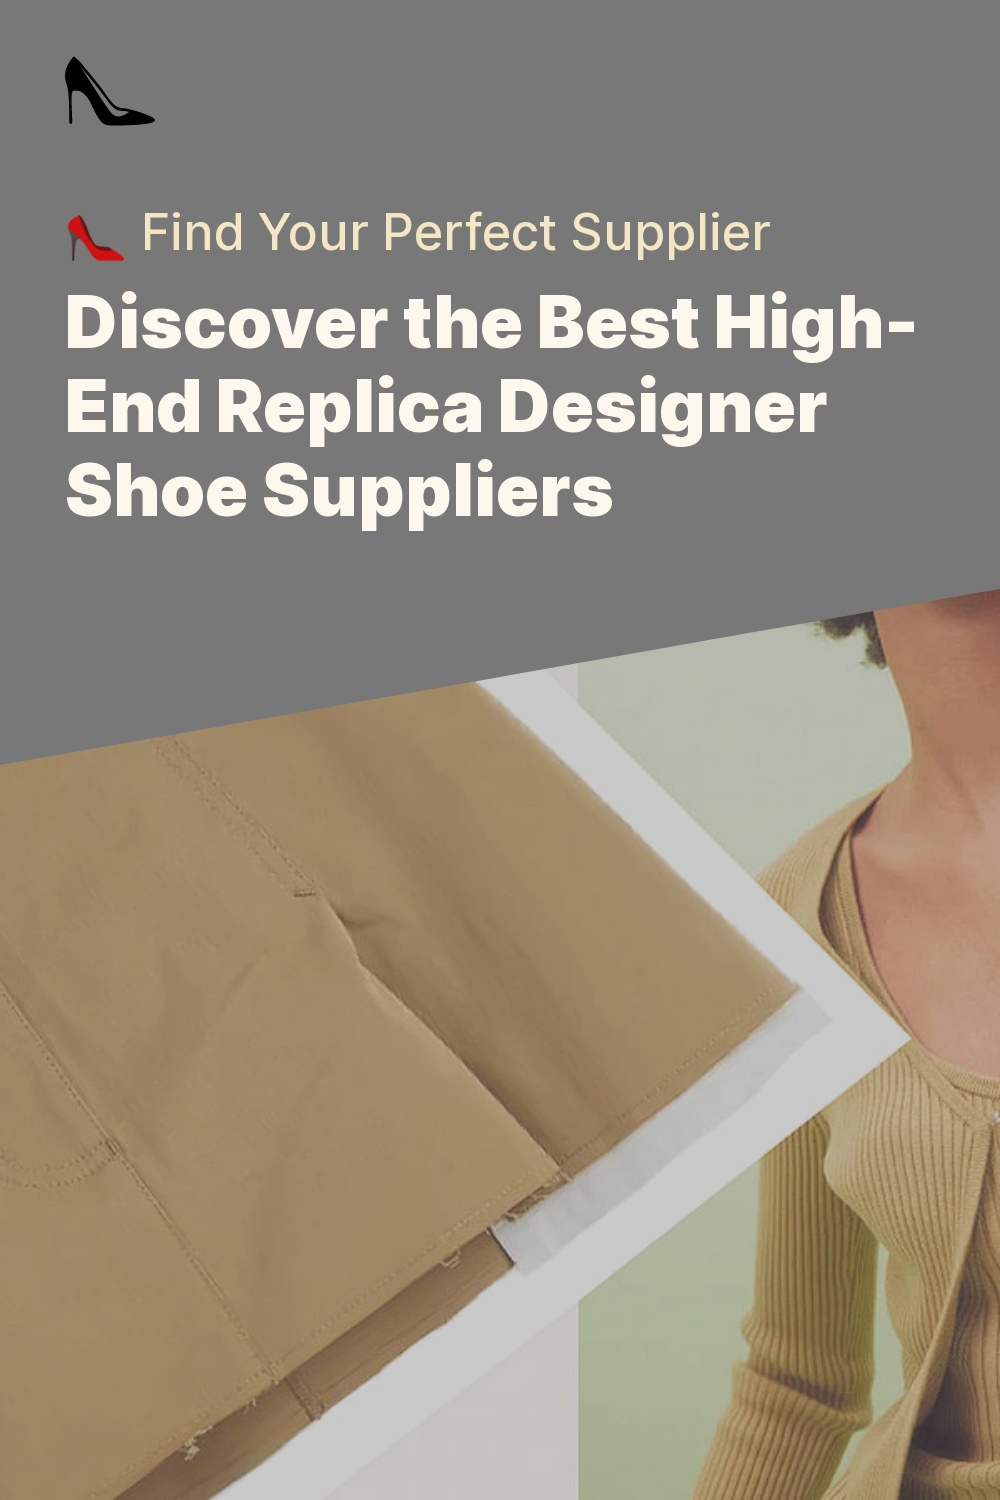 Discover the Best High-End Replica Designer Shoe Suppliers - 👠 Find Your Perfect Supplier